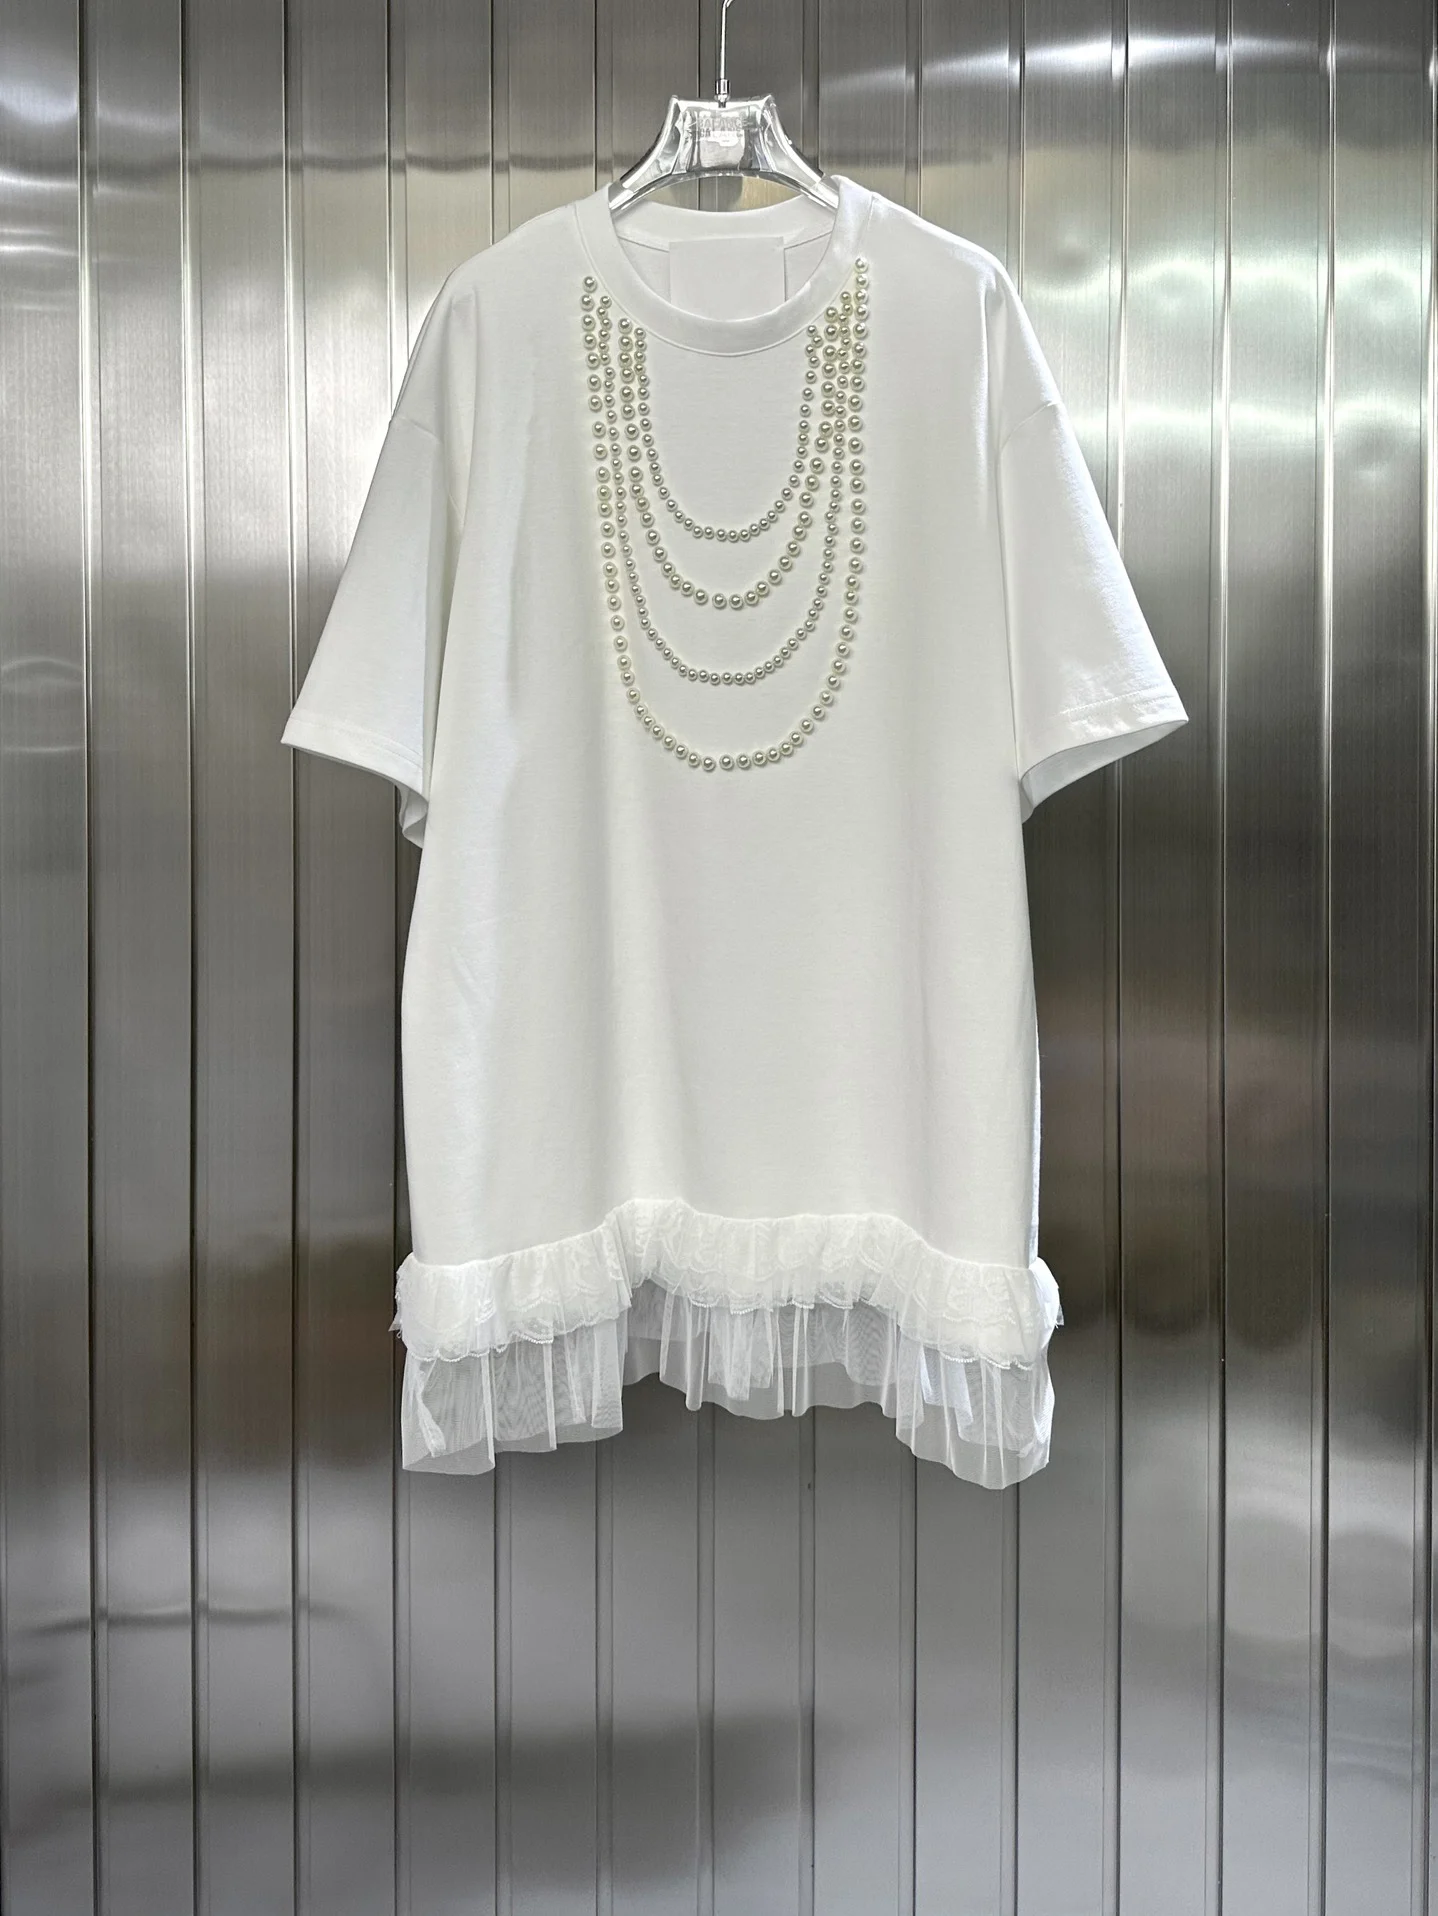 Short-sleeved dresses with pearl look great on their own or as oversized T-shirts5.29